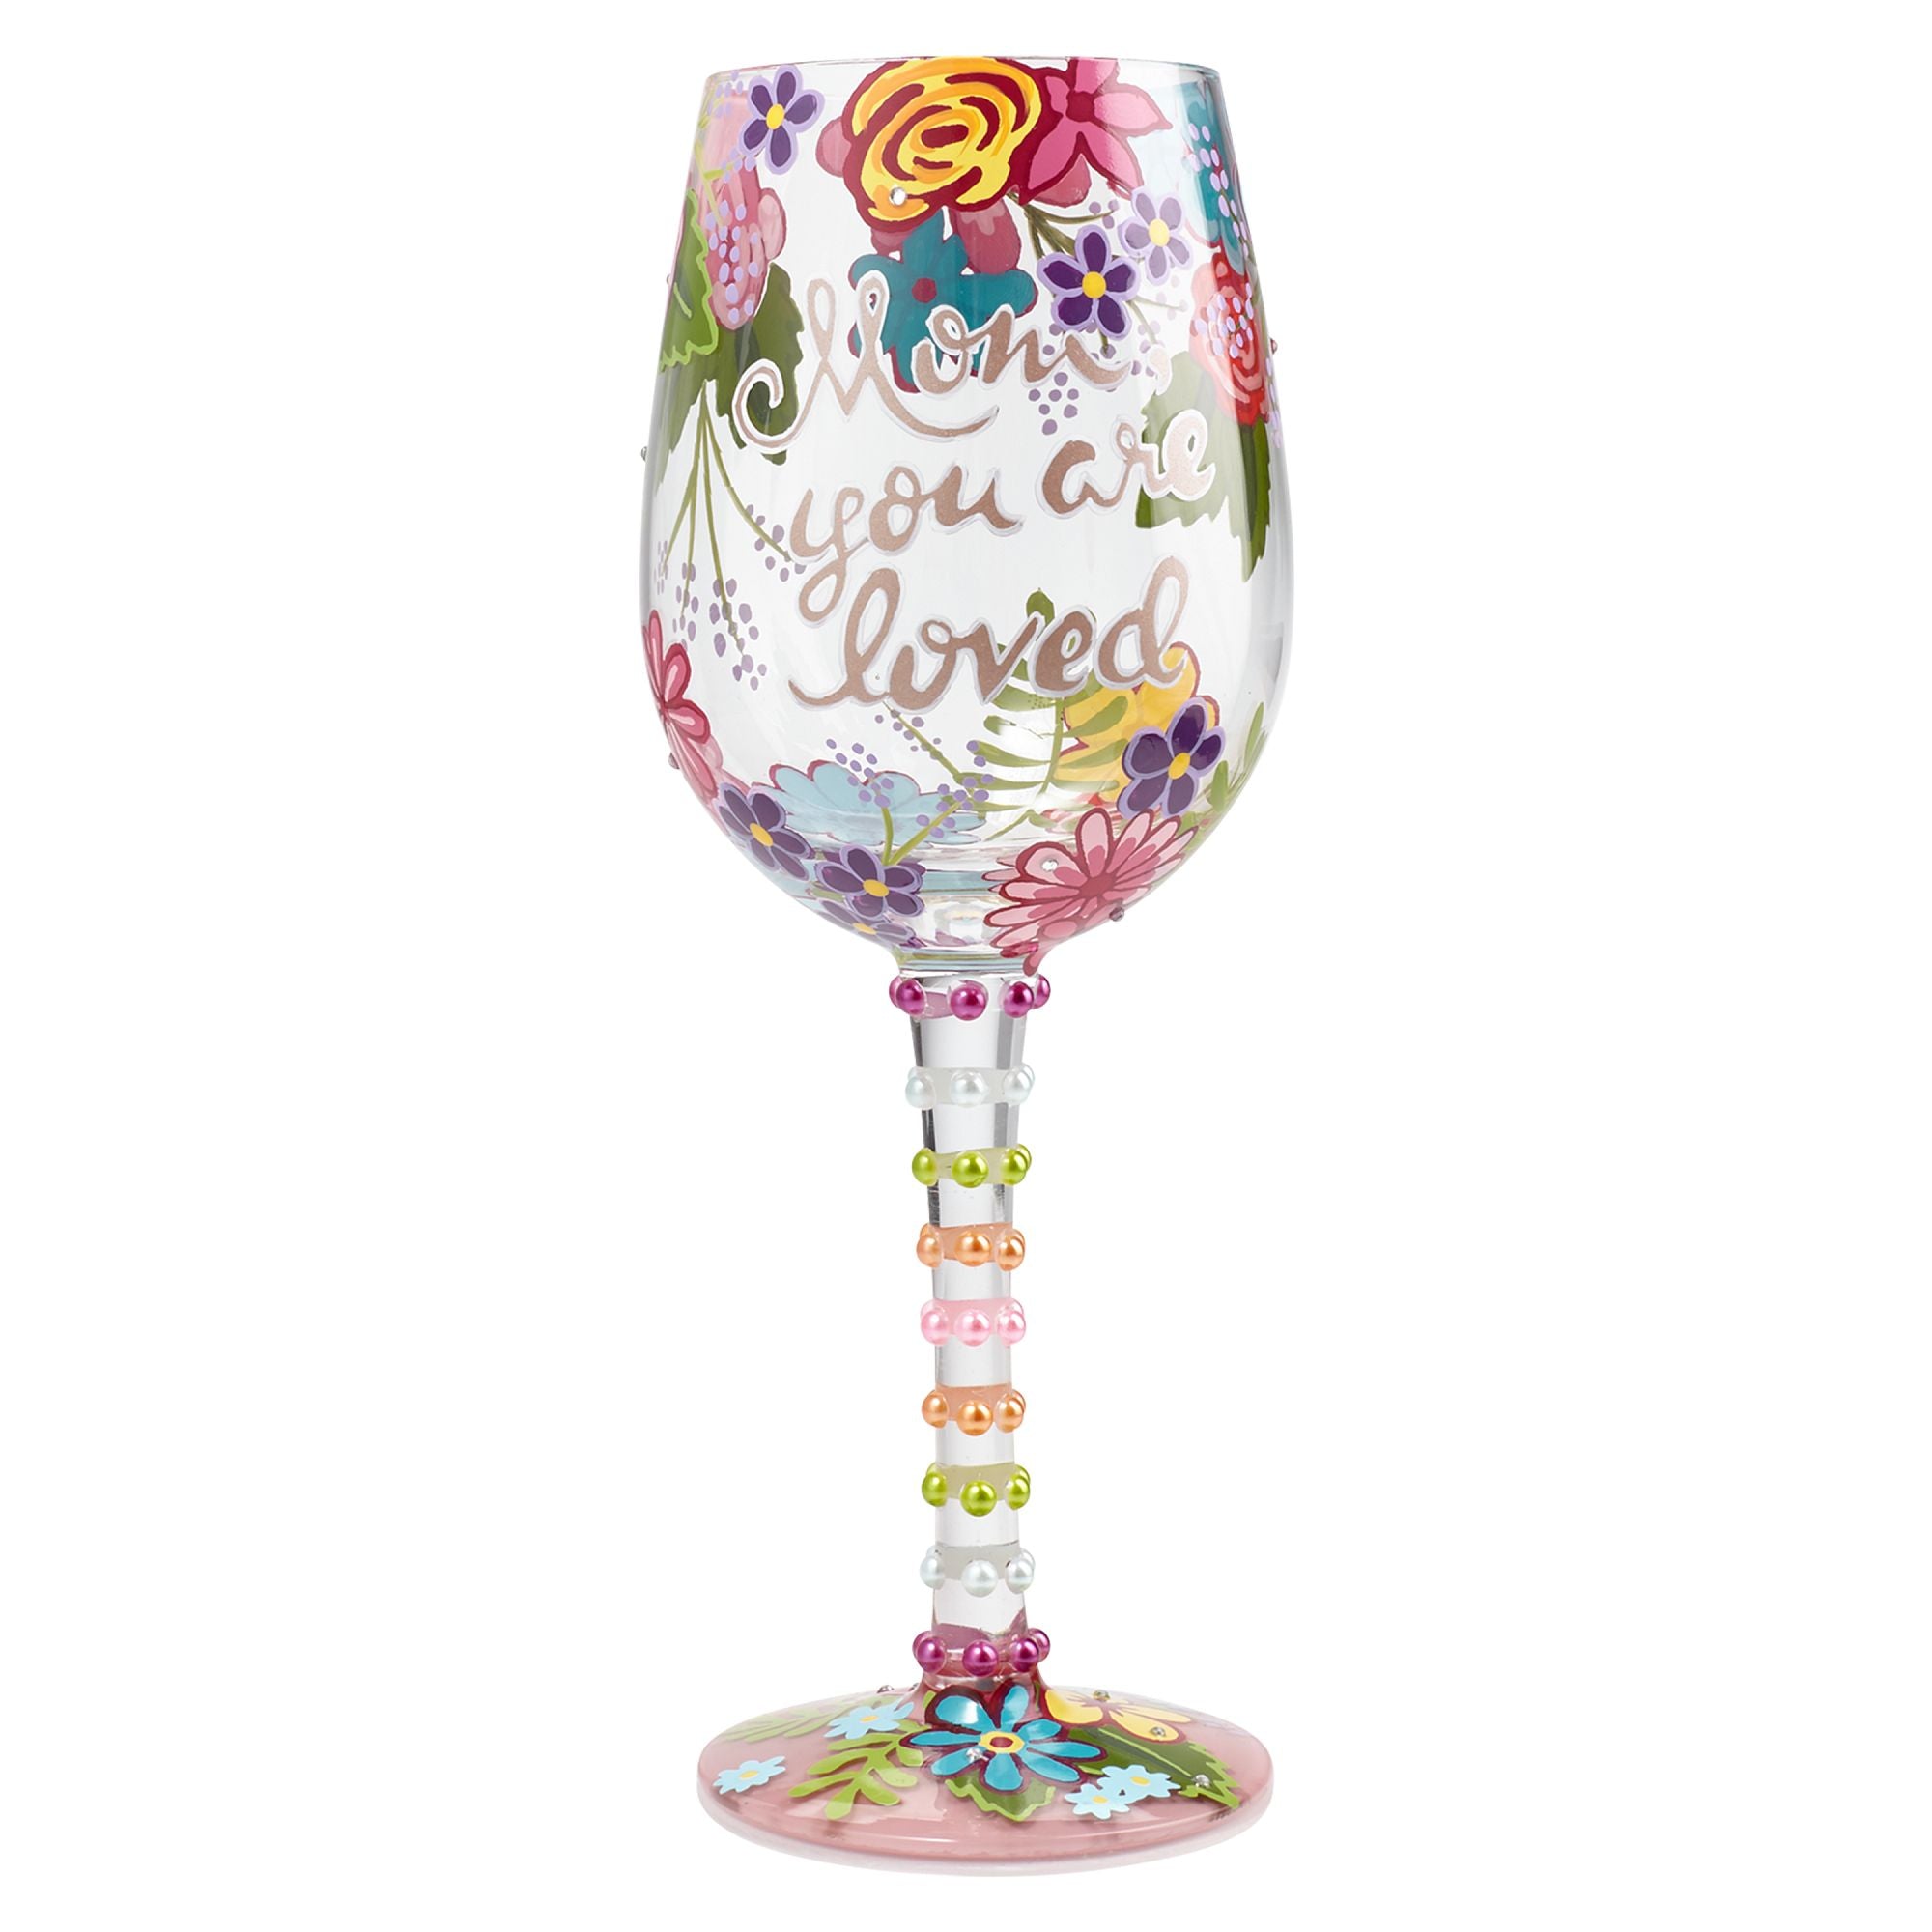 It's a Tulip Party! Yellow Tulip Wine Glass - Painted Base